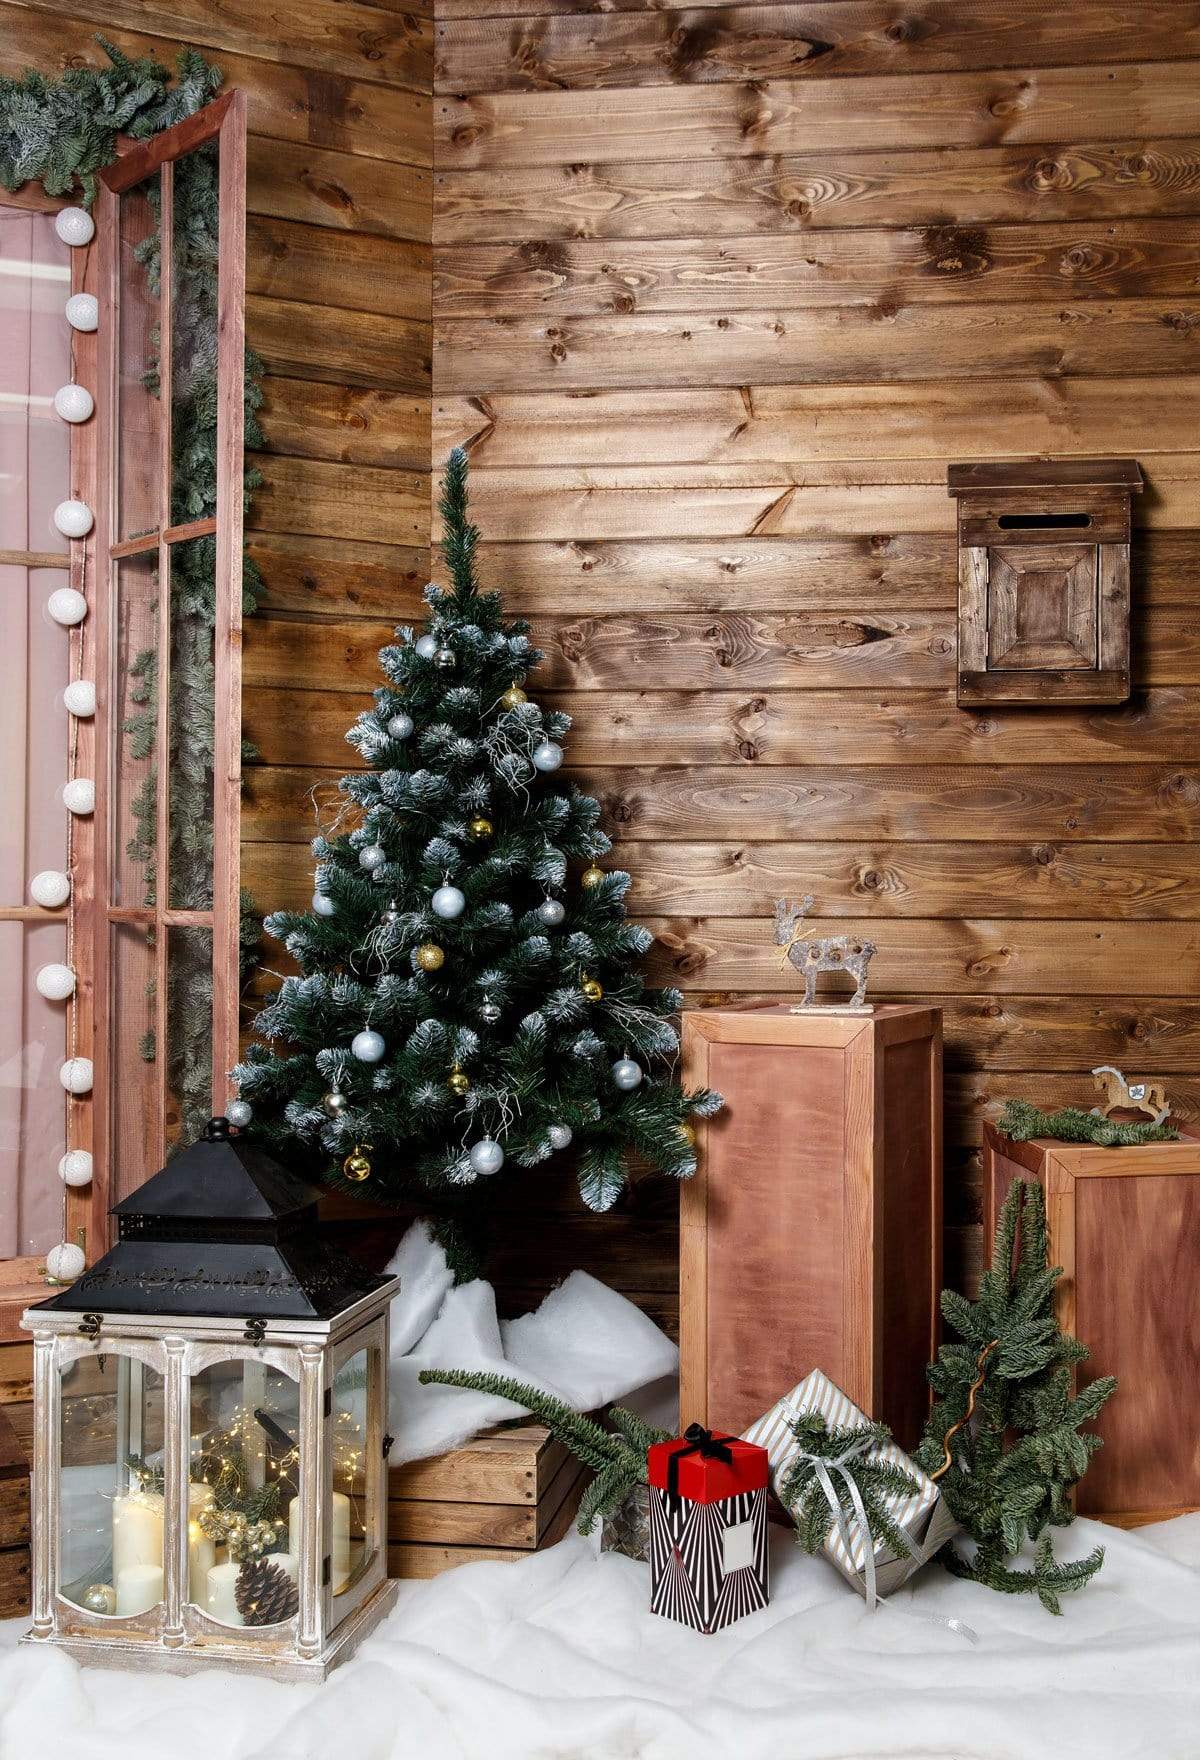 Kate Wood Wall And Christmas Tree With Decorations for Photography